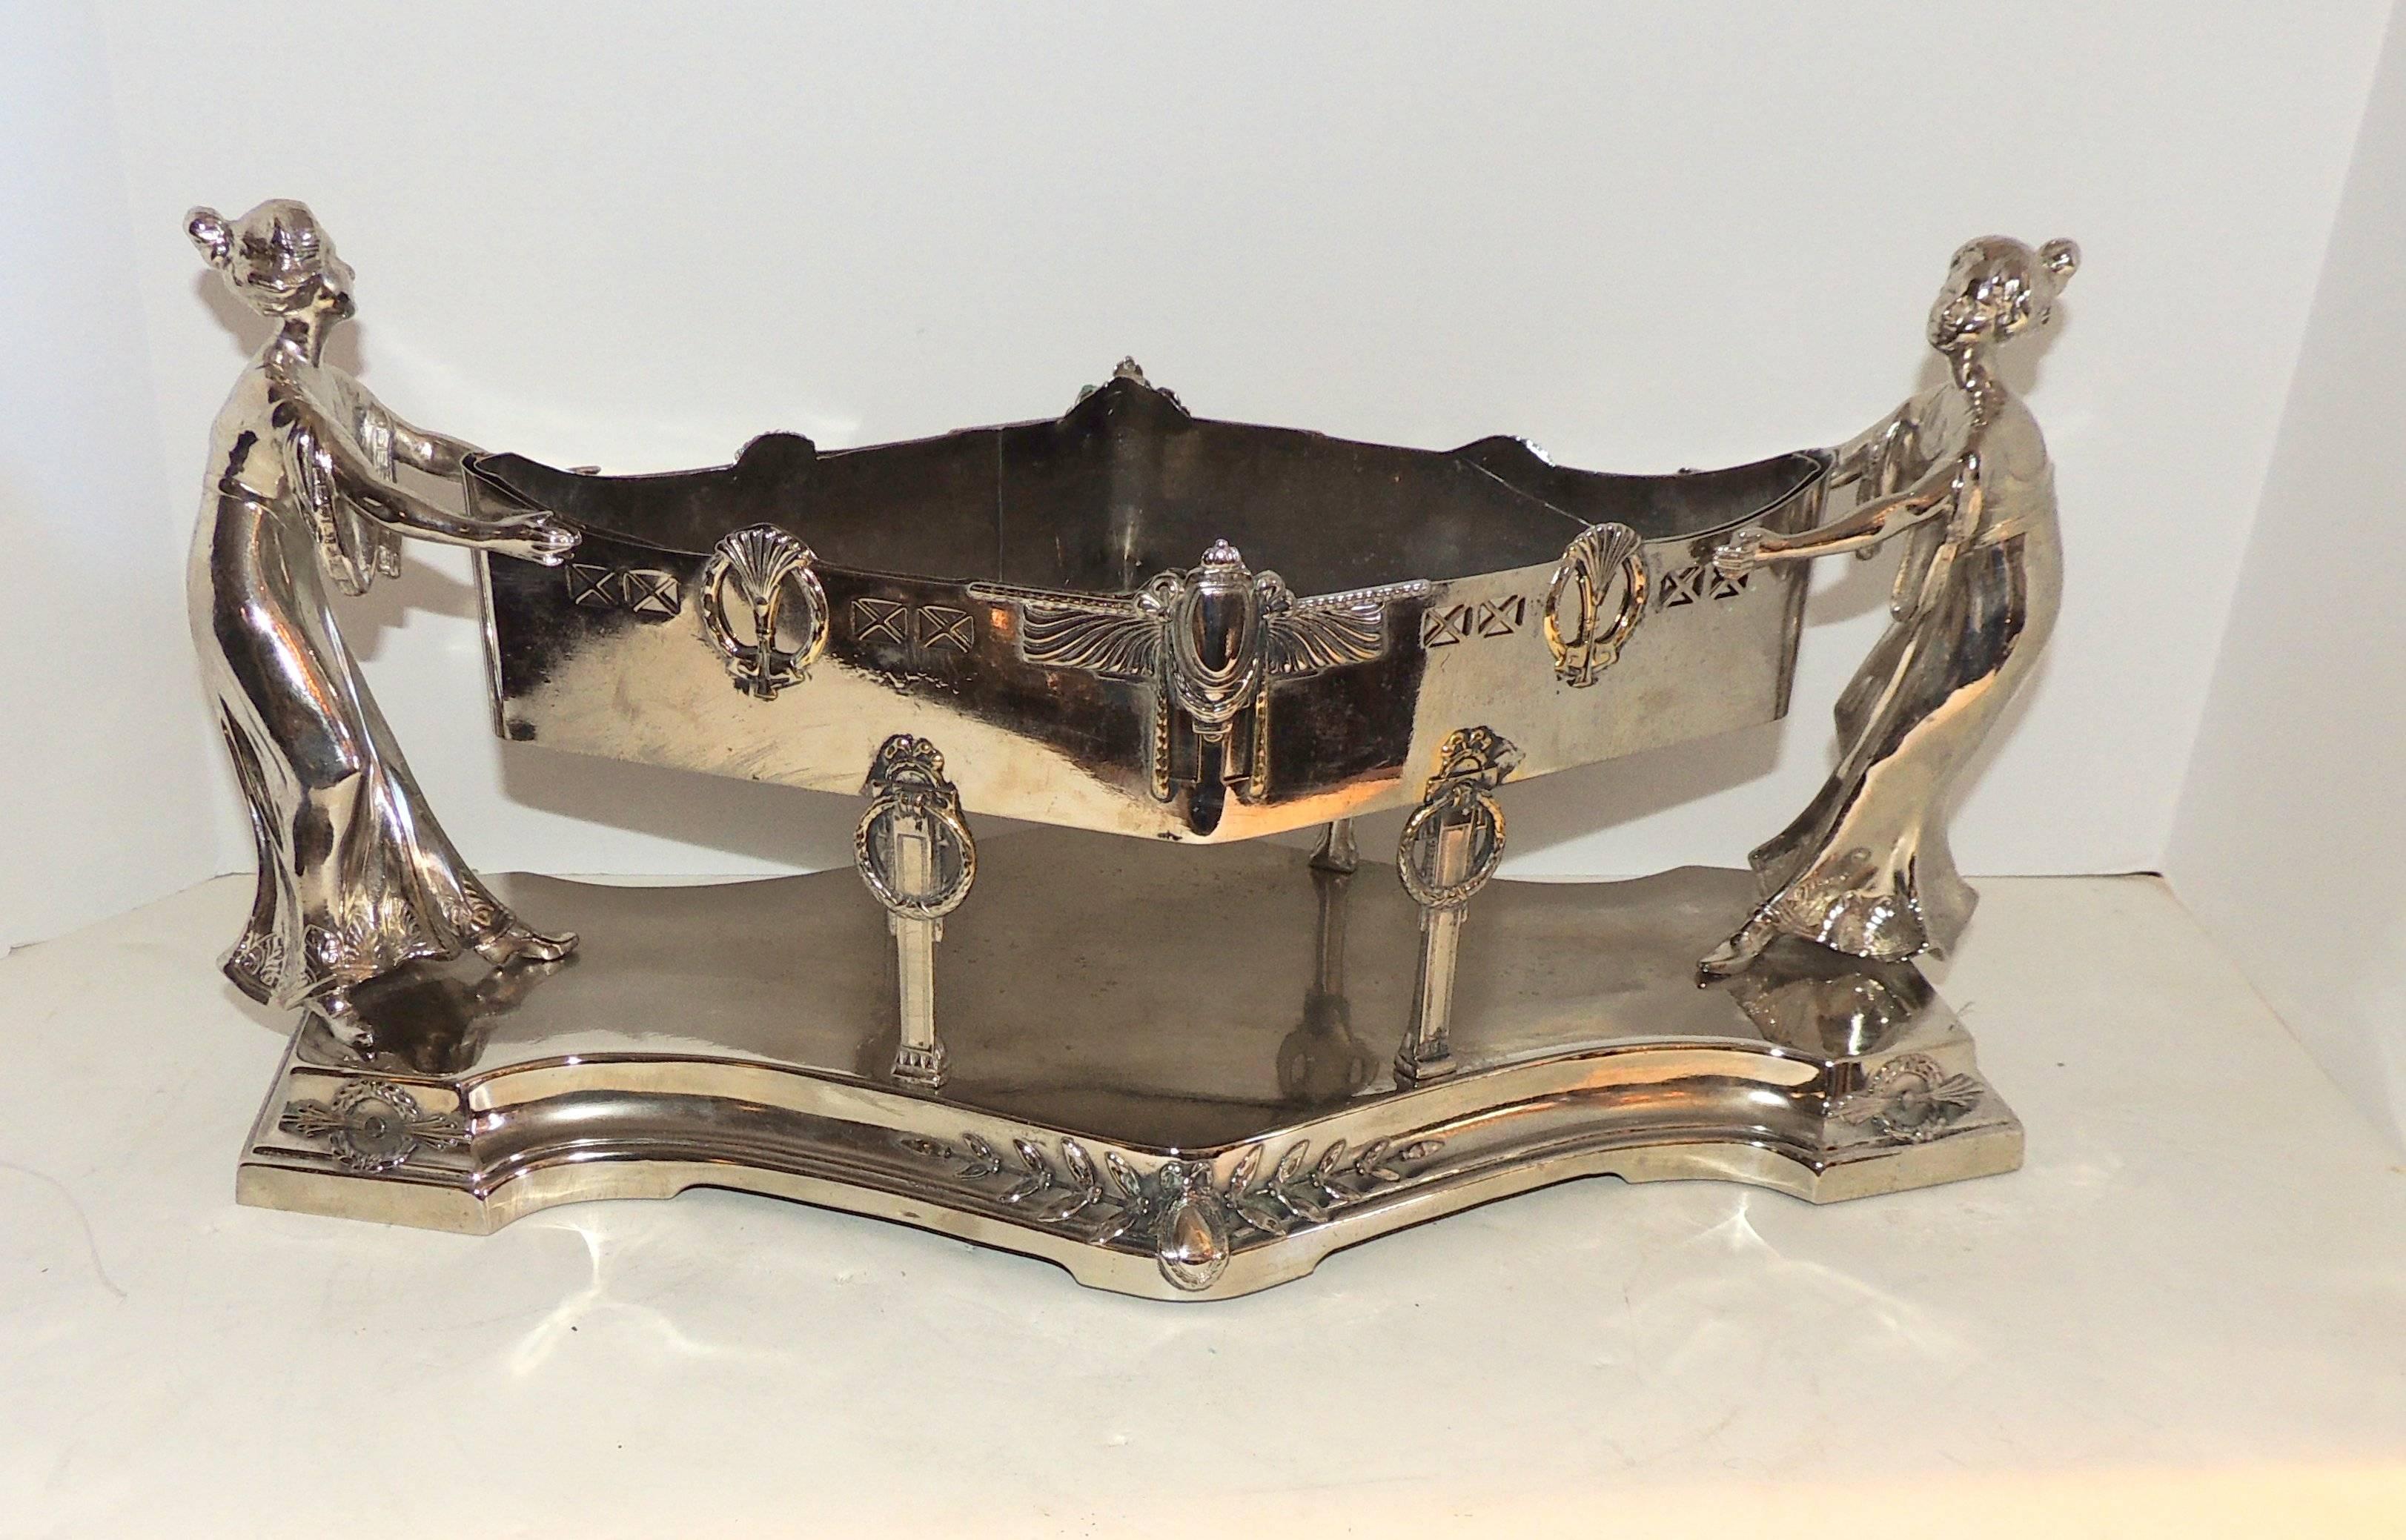 A wonderful silver plated Art Deco centerpiece with two female figures supporting the diamond shape centerpiece with removable insert. Decorated with draping, wreaths and filigree detail.
Stamped Argentor, in the manner of WMF

Measures: 18